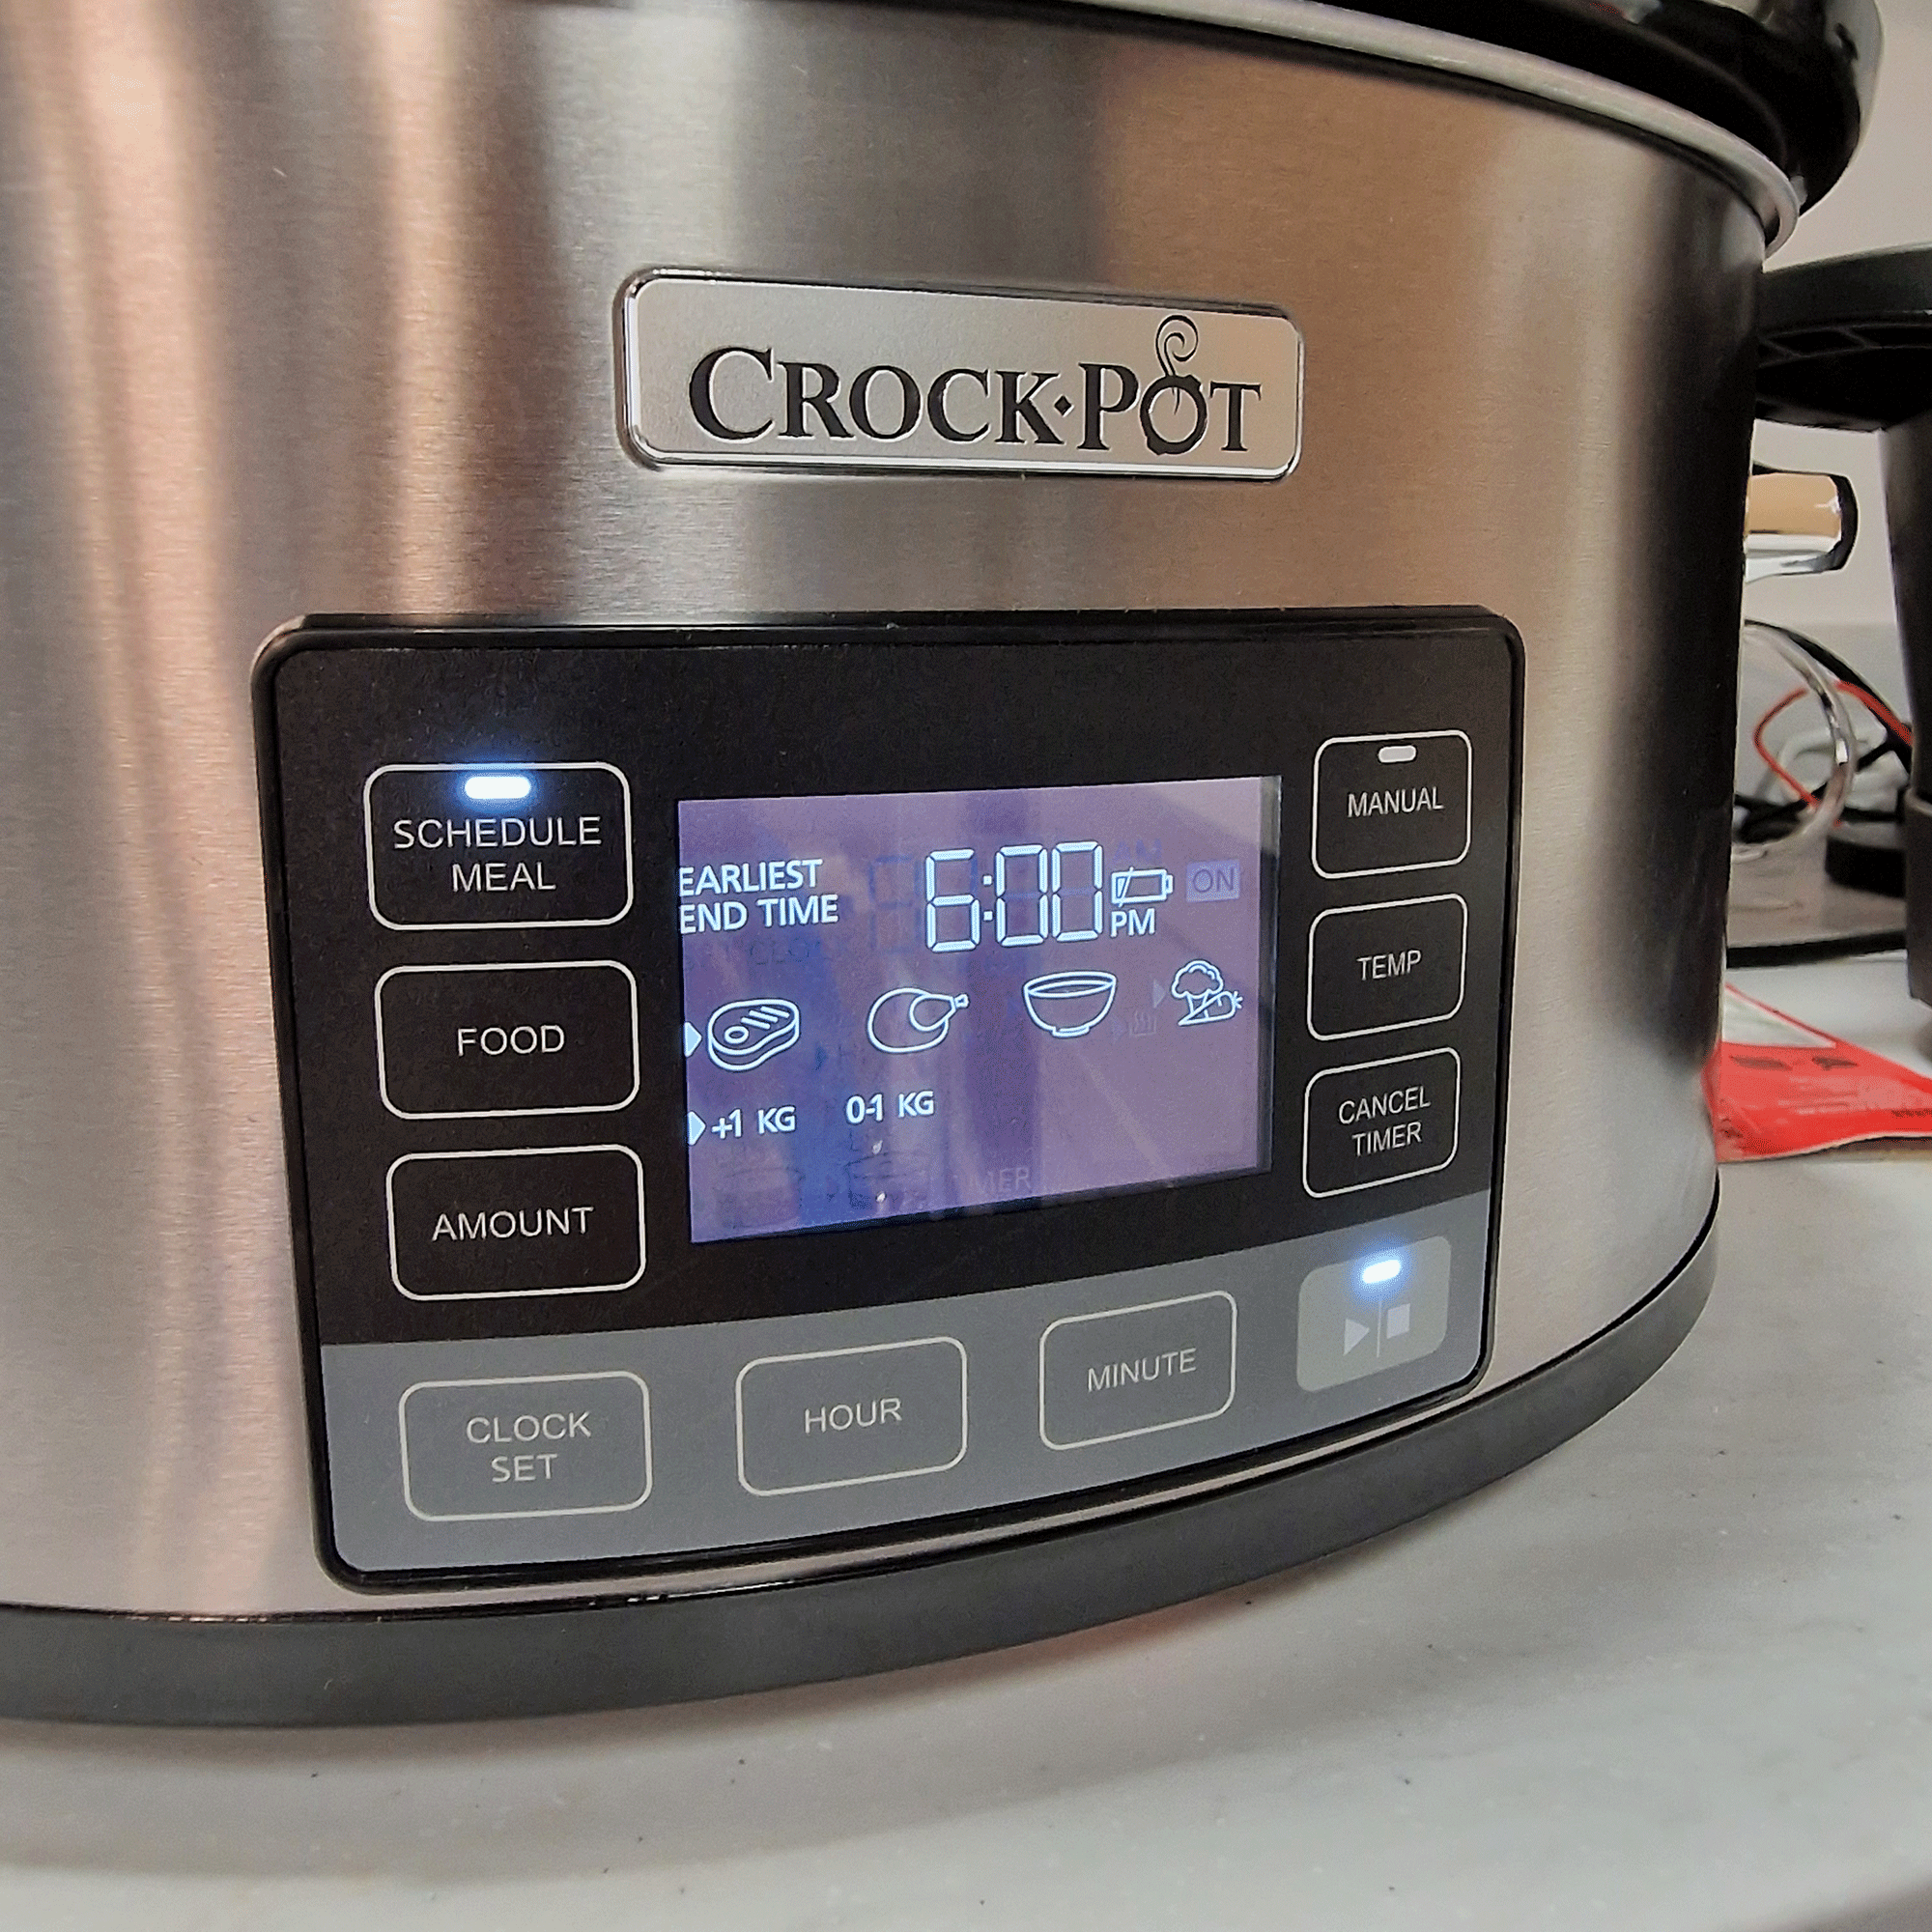 Sliver slow cooker with illuminated screen